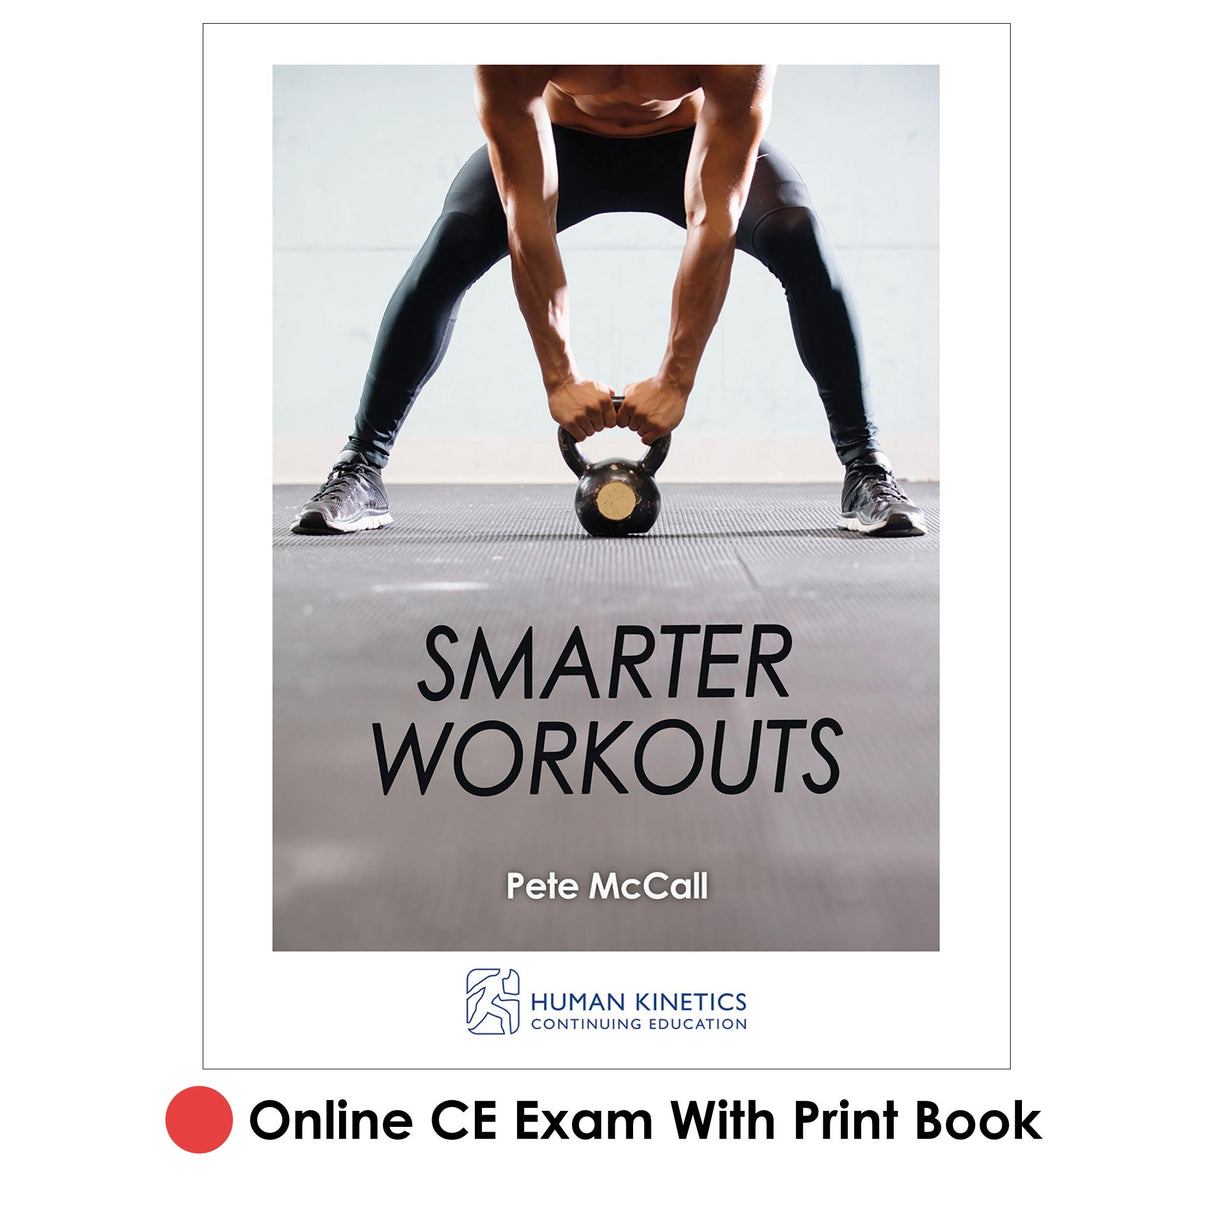 Smarter Workouts Online CE Exam With Print Book